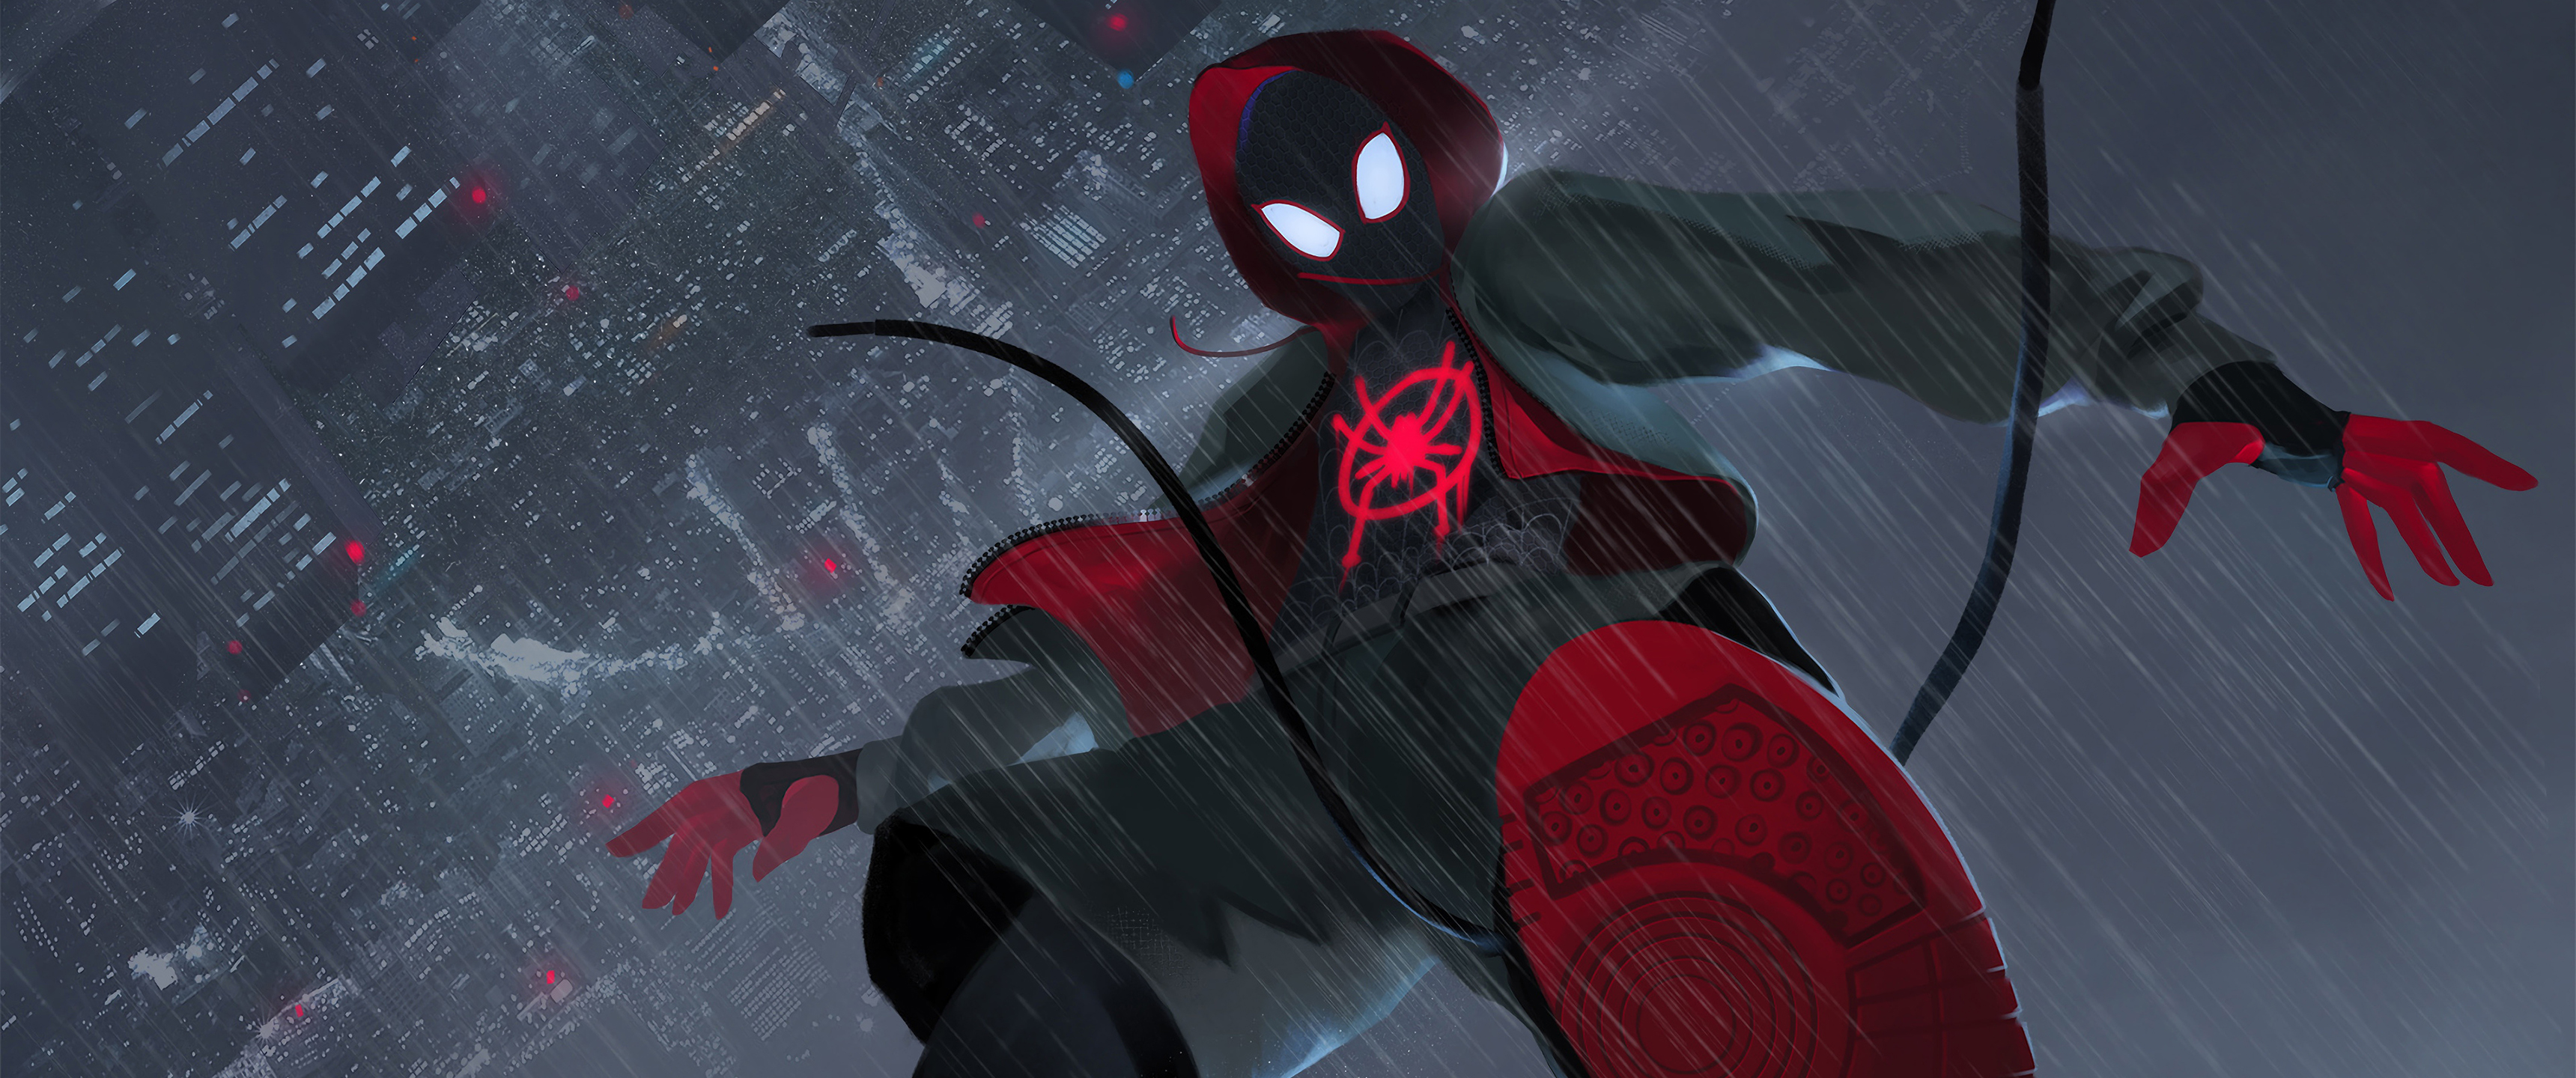 General 3440x1440 Spider-Man animated movies rain superhero Miles Morales Spider-Man: Into the Spider-Verse digital art ultrawide shoe sole looking at viewer hoods upside down city jacket shorts